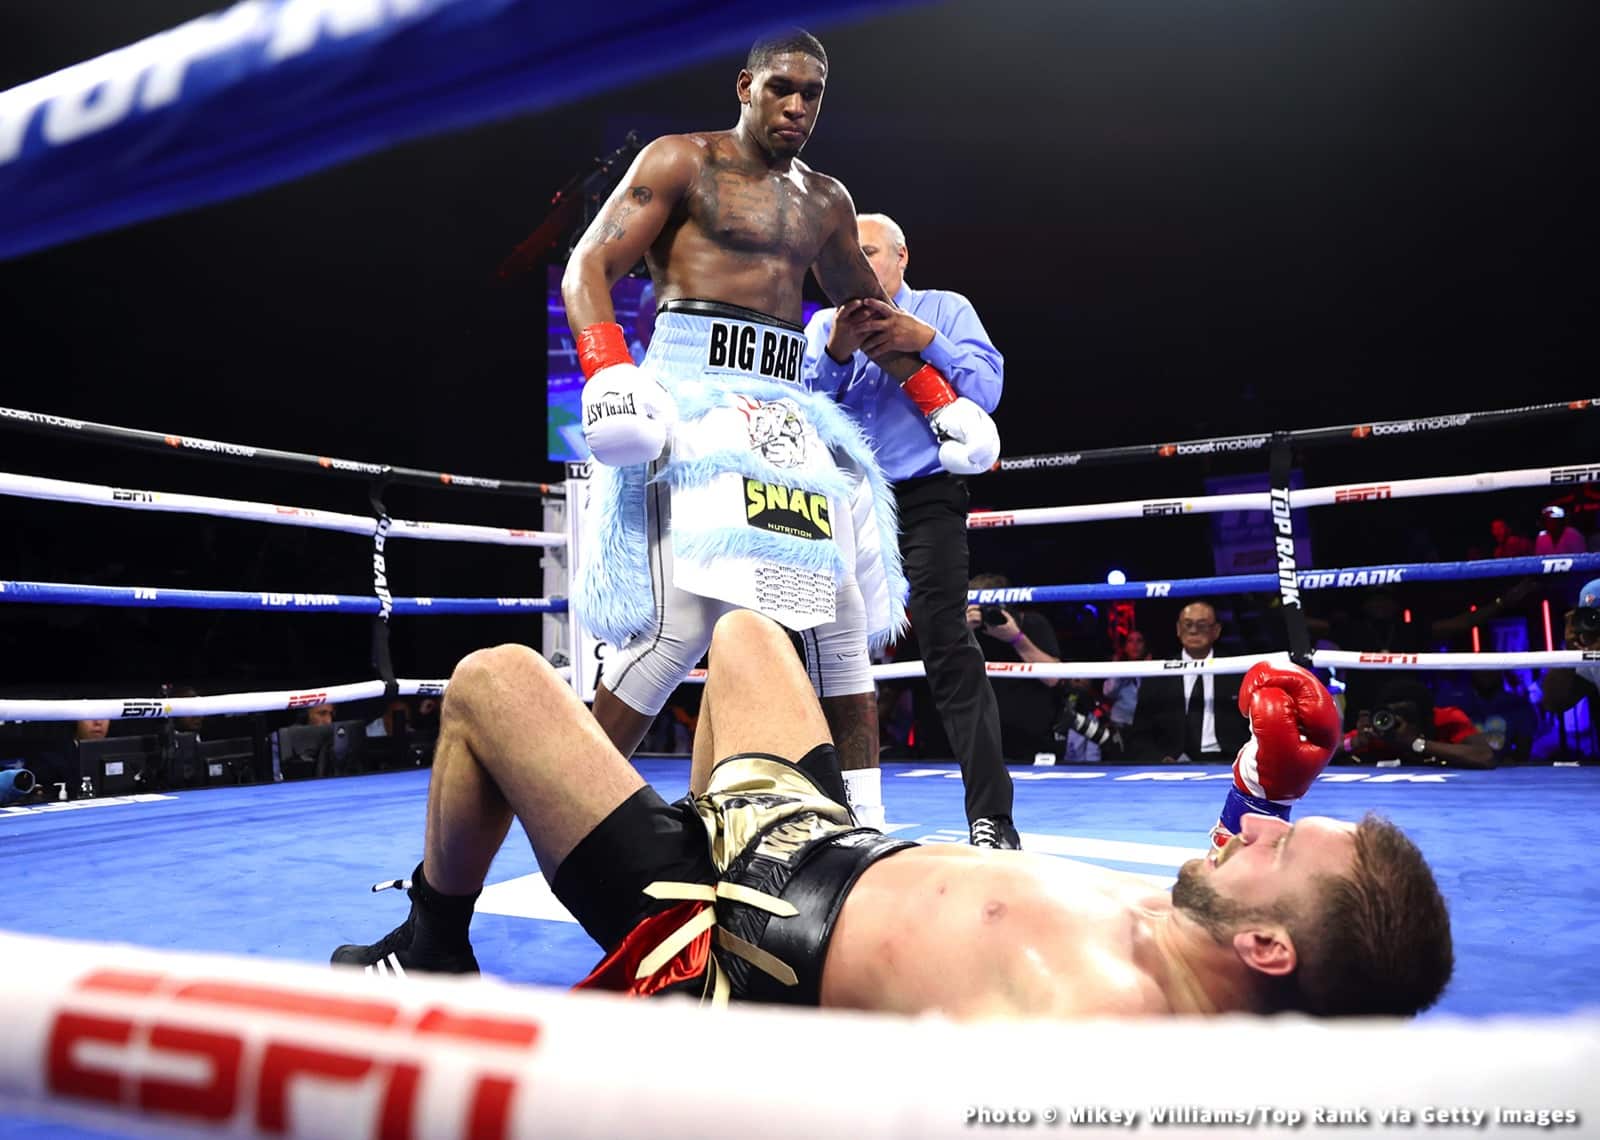 Image: Jared Anderson stops Miljan Rovcanin in 2nd round